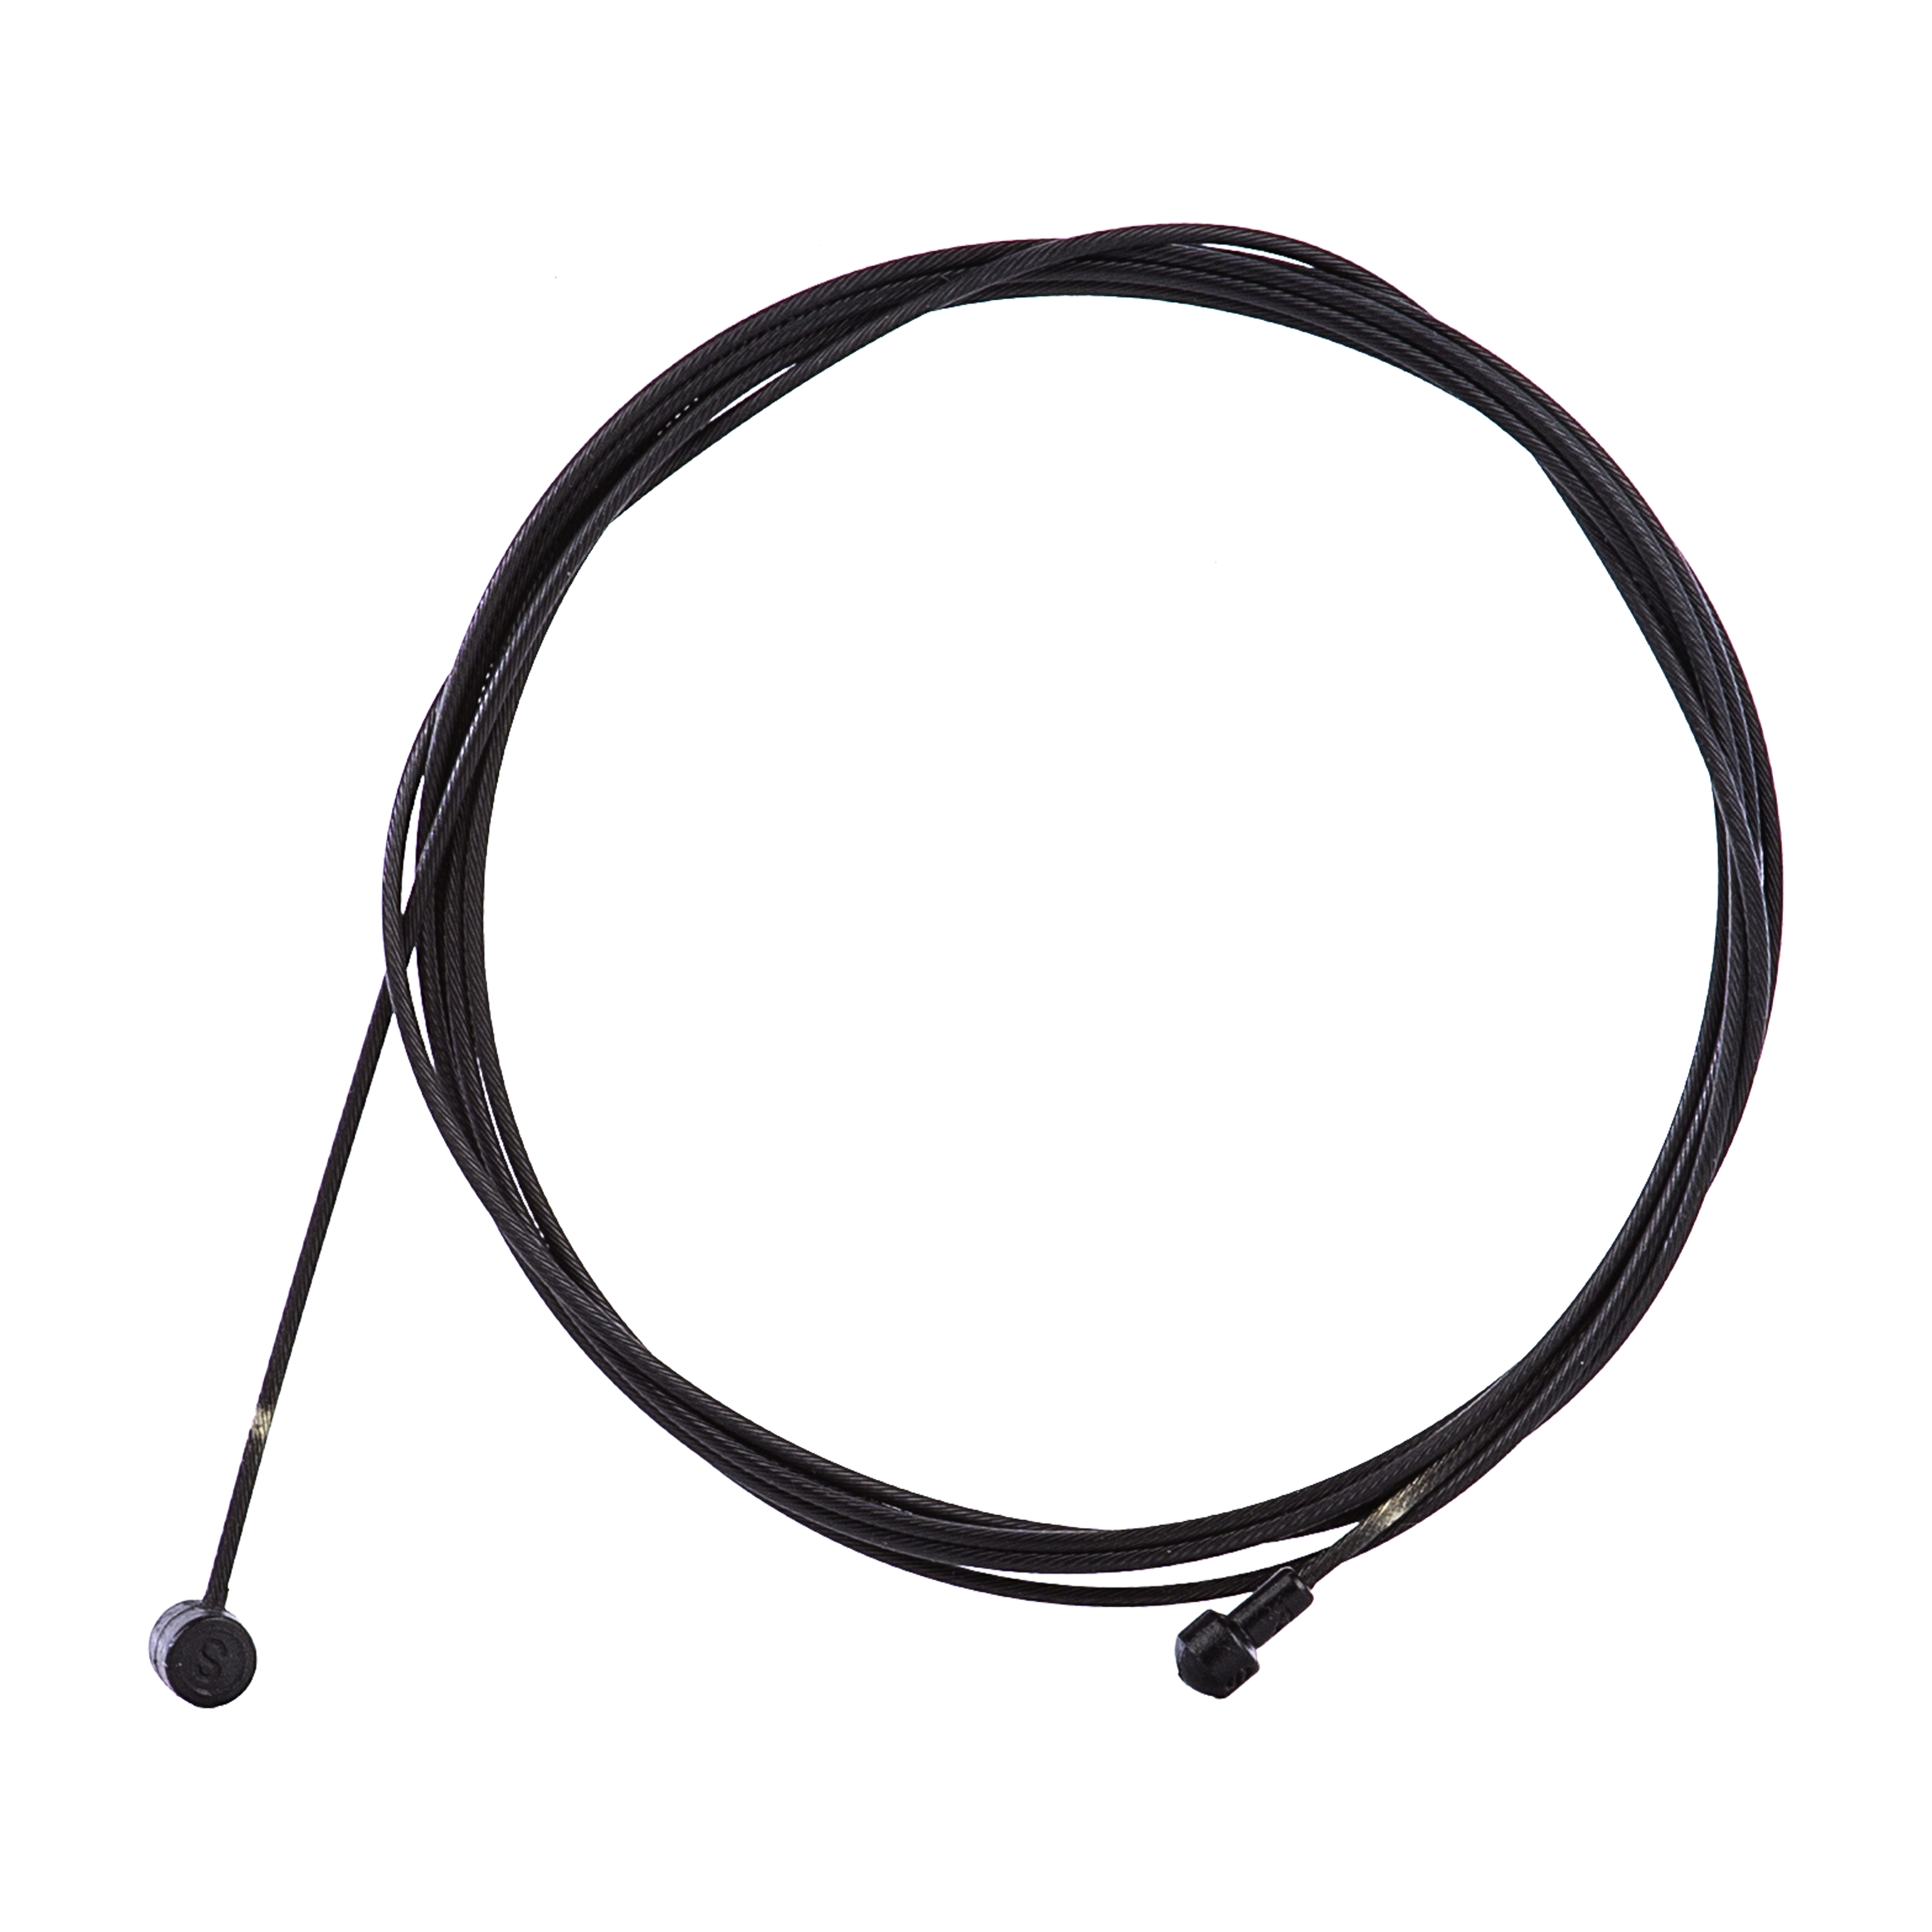 BICYCLE BIKE BLACK BRAKE CABLE HOUSING 50 FT ROLL NEW 